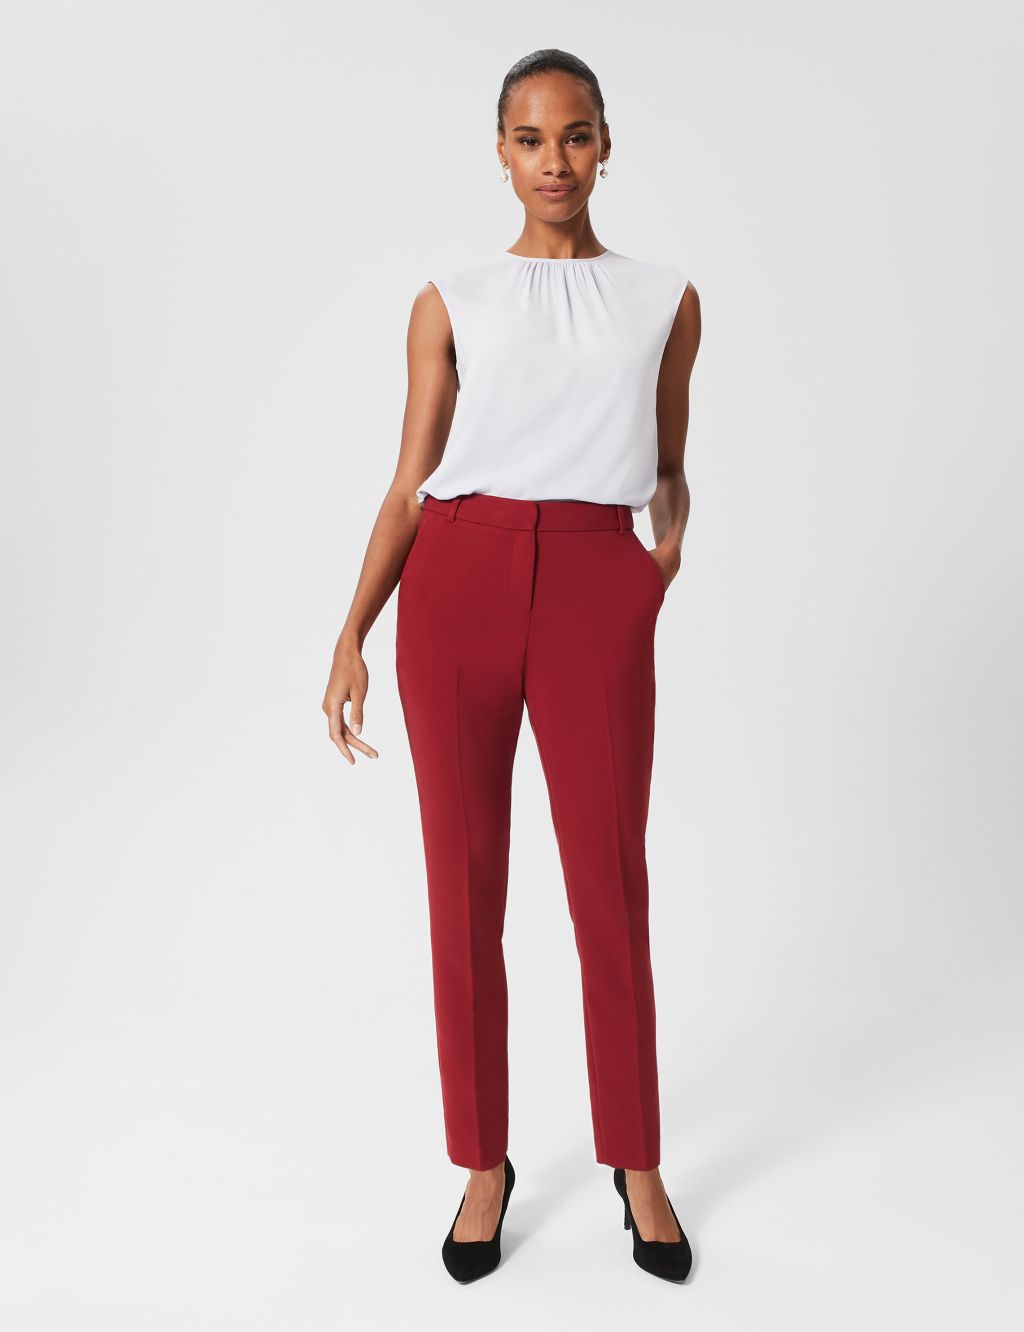 Women's Red Trousers | M&S